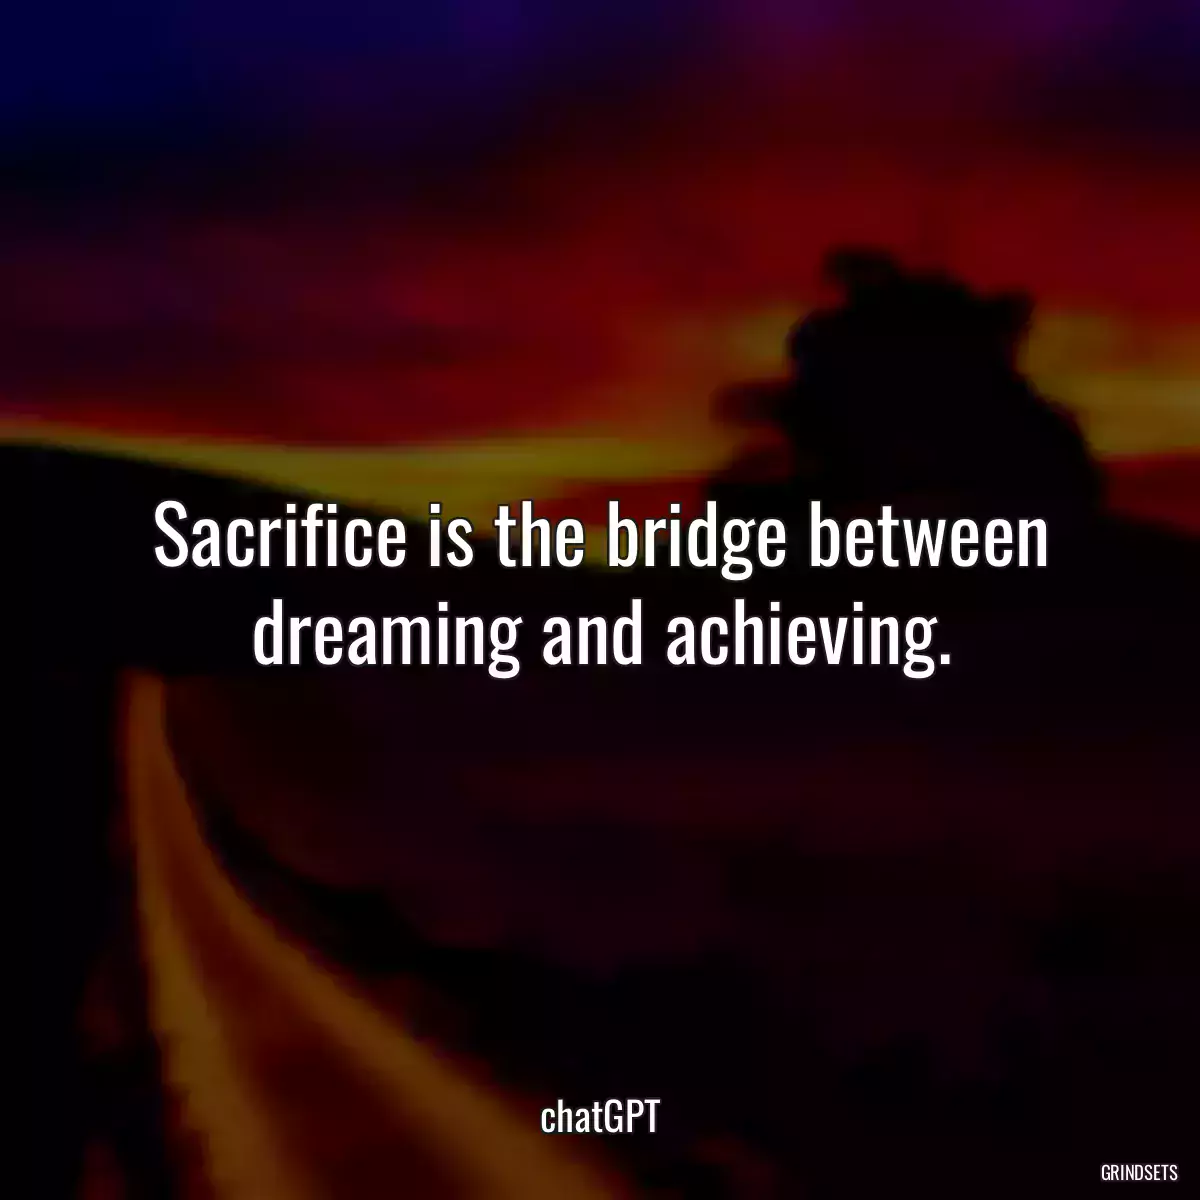 Sacrifice is the bridge between dreaming and achieving.